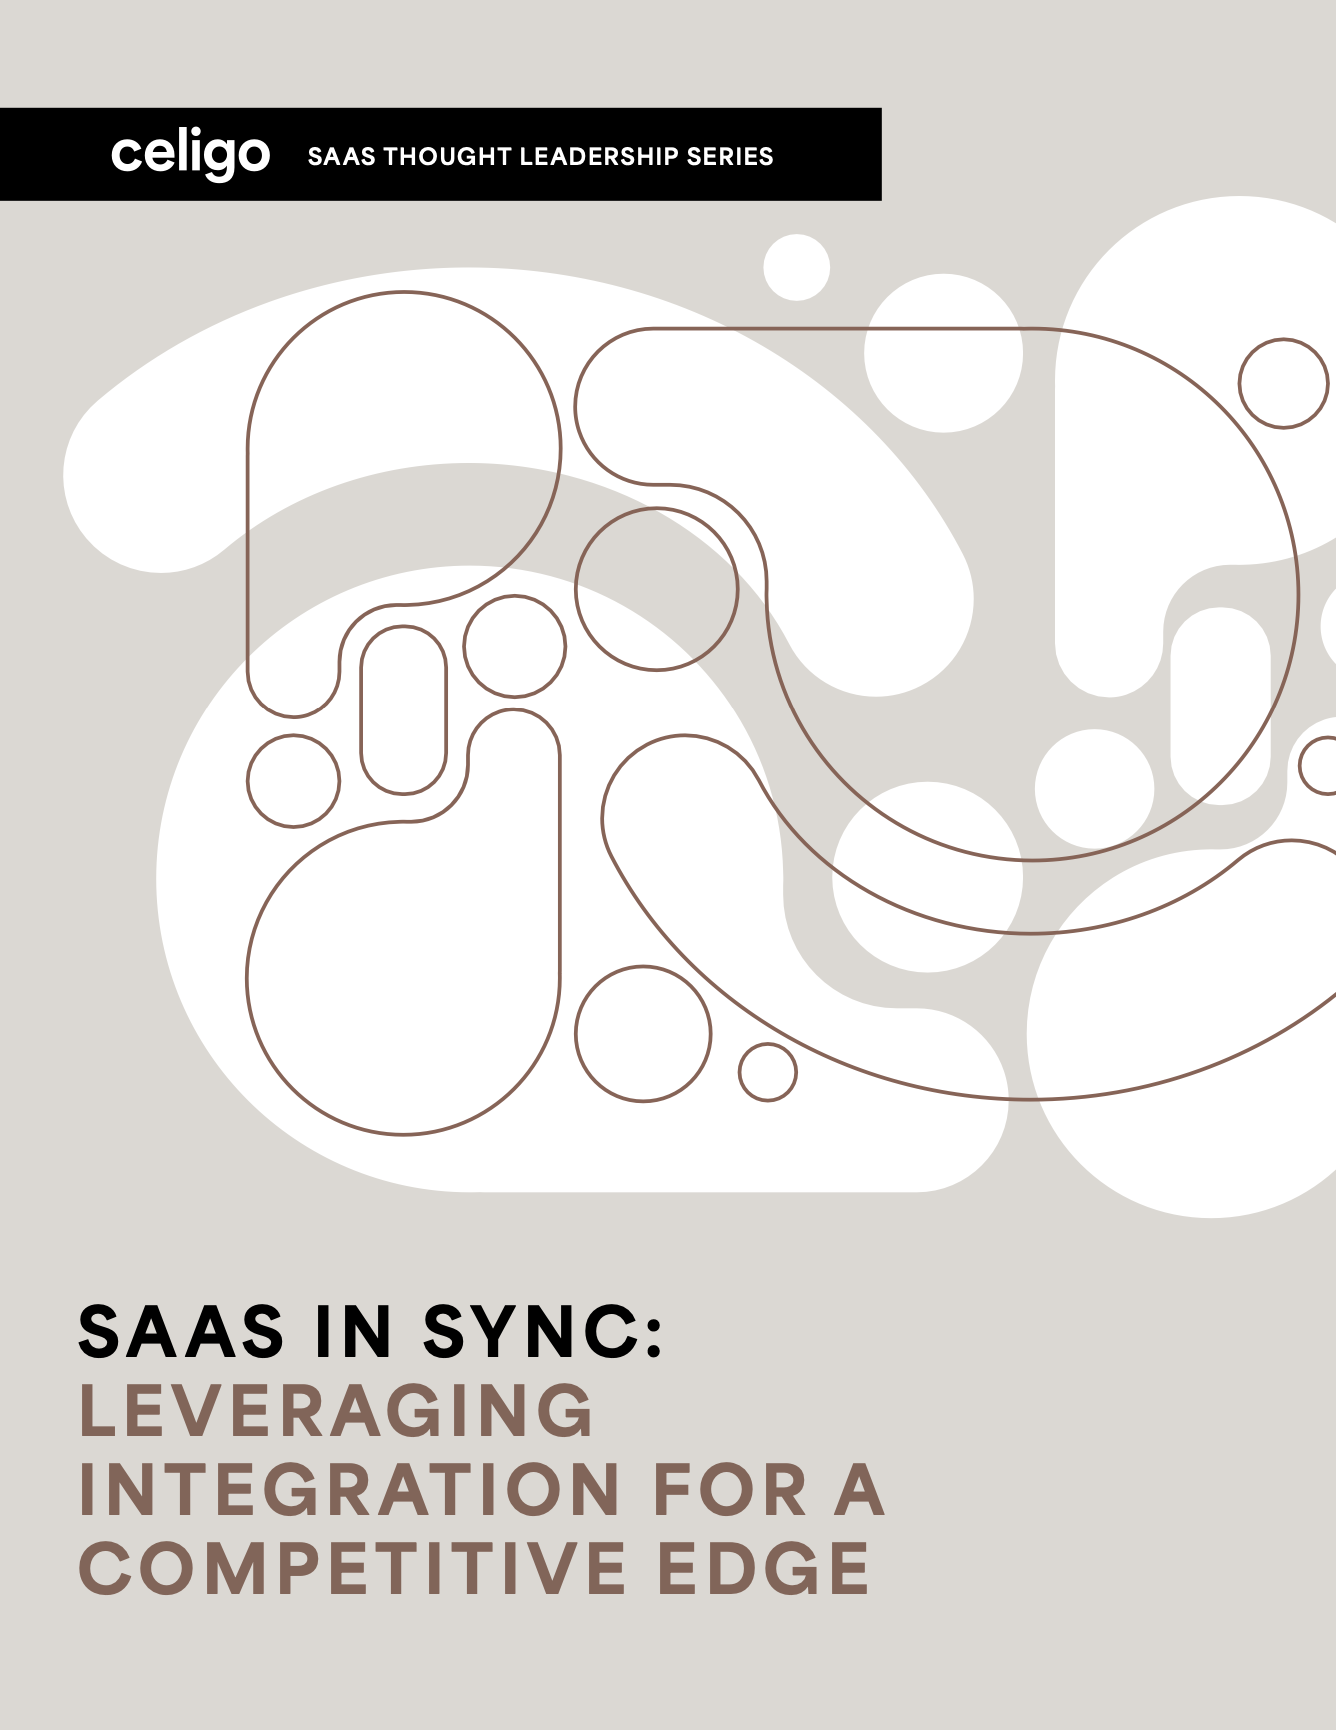 SaaS in sync: Leveraging integration for a competitive edge